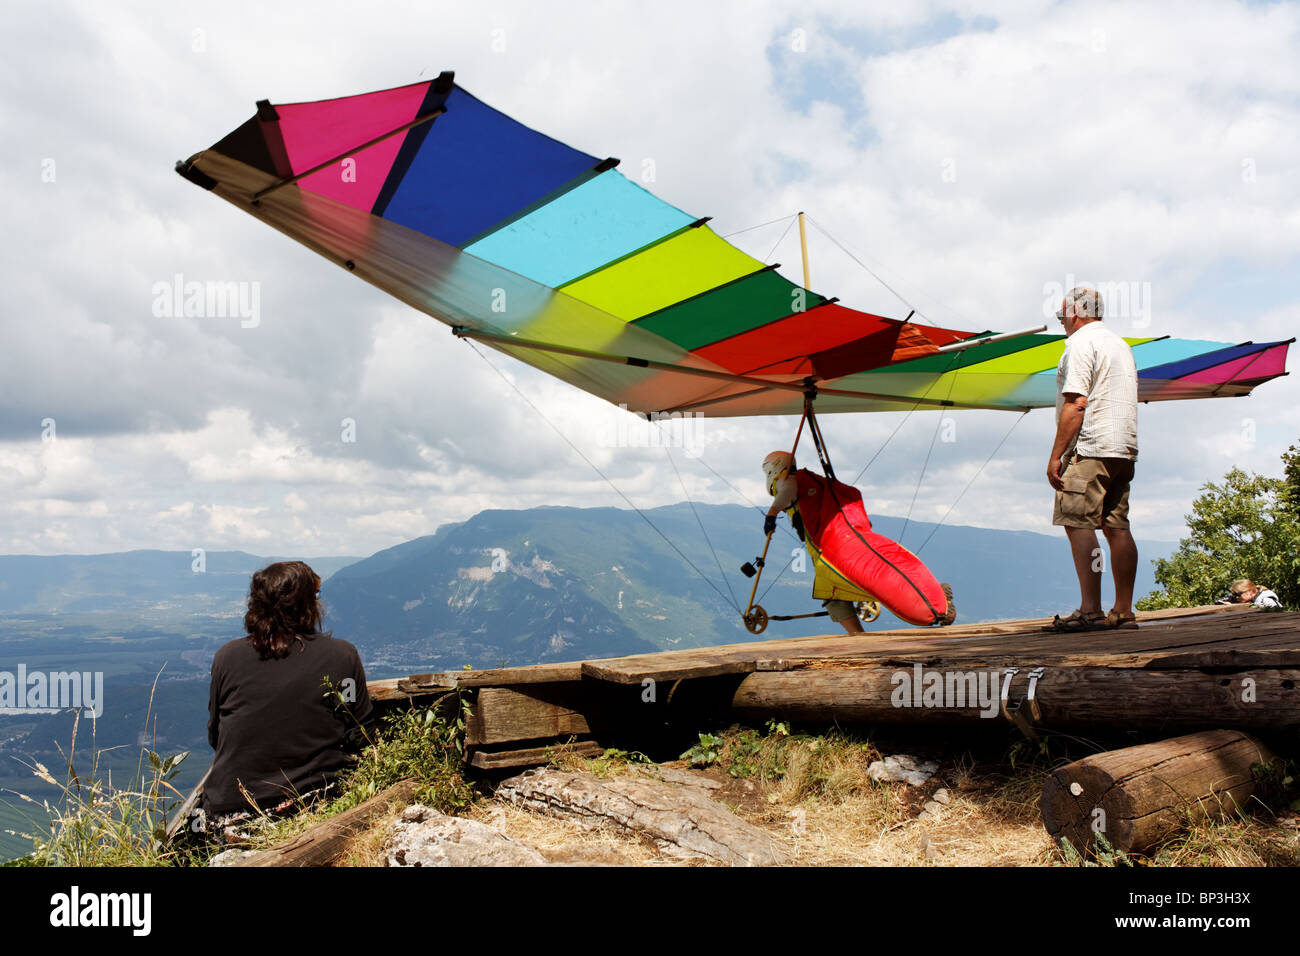 Hang glider on his launching pad Stock Photo